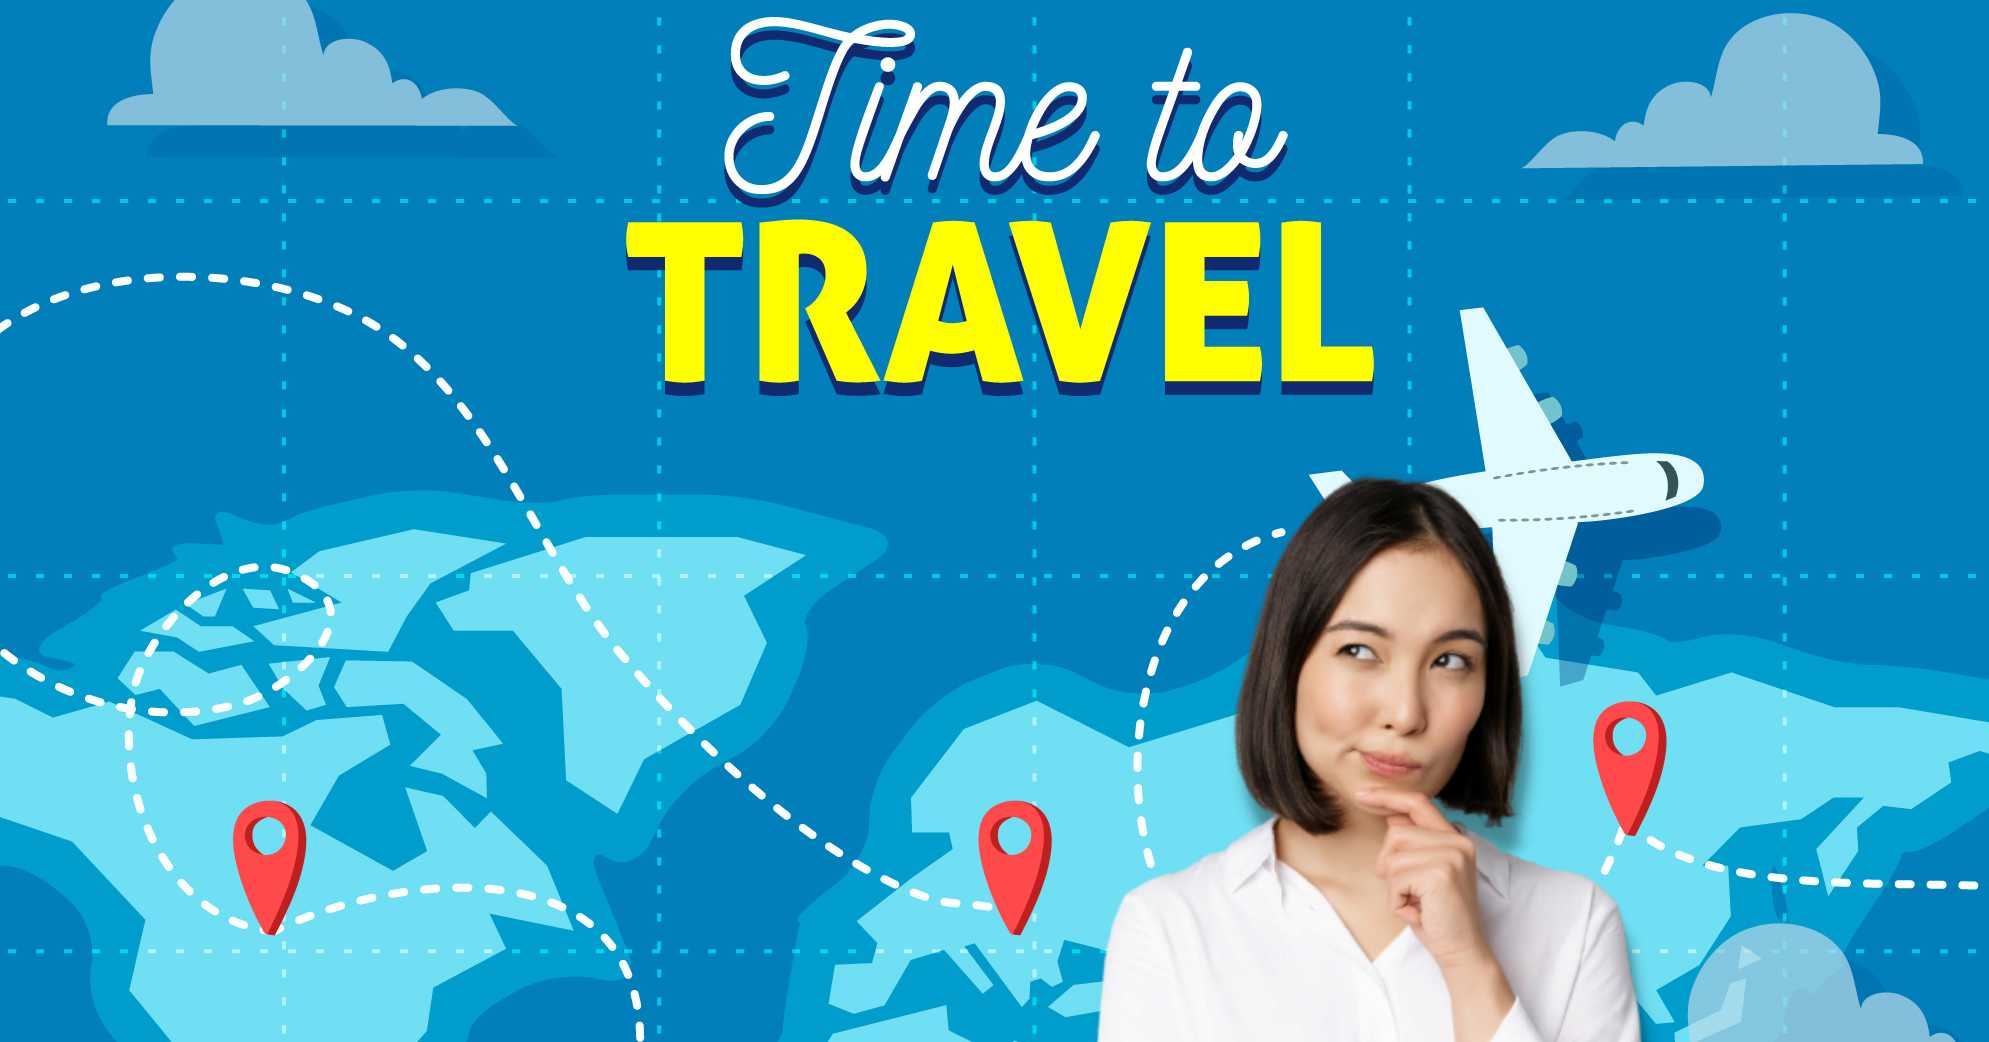 Moving Abroad as an OFW: How To Choose A Country